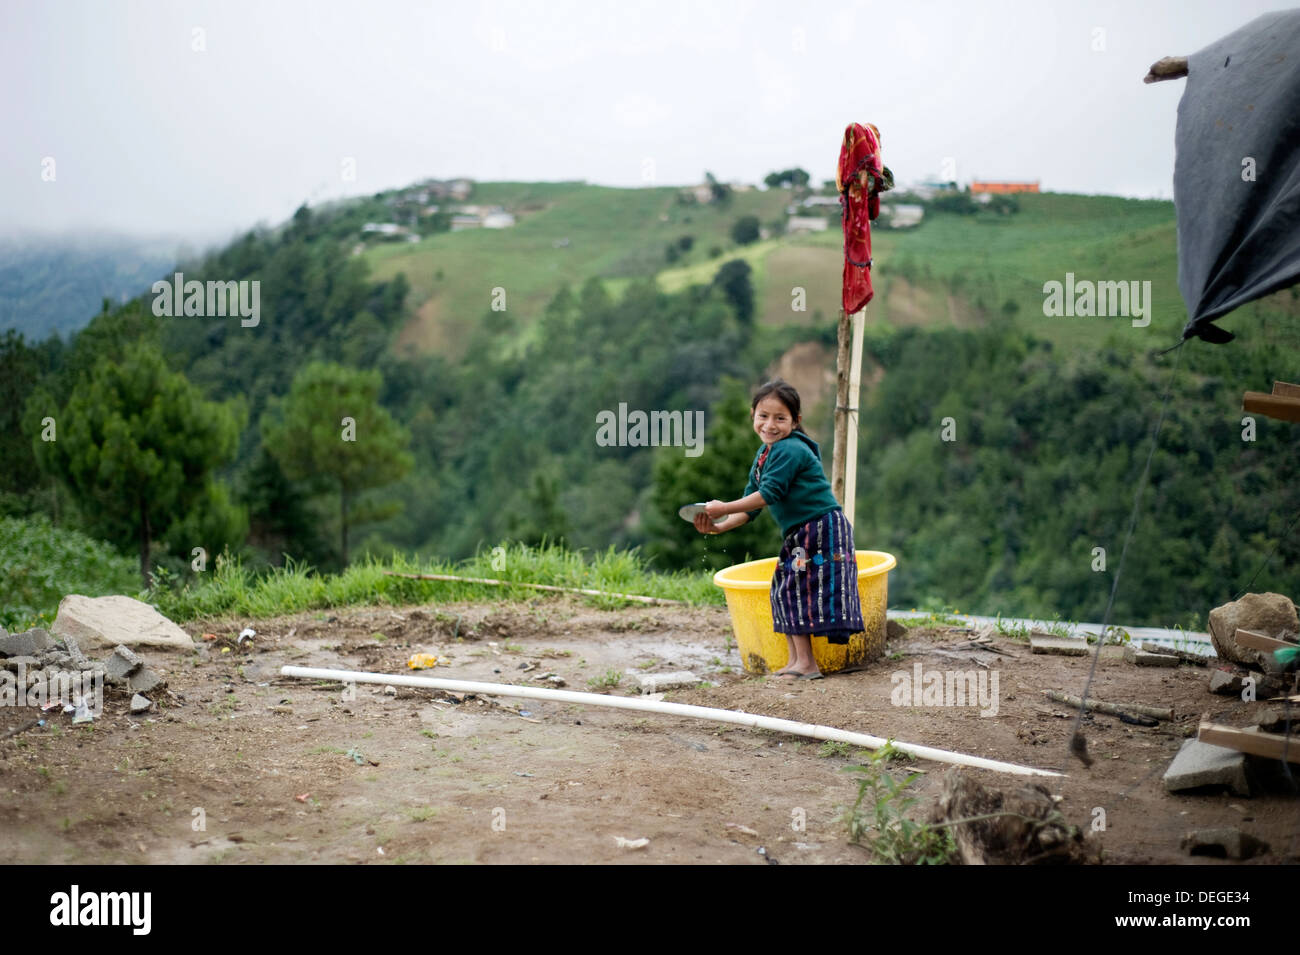 A Guatemalan girl in traditional Maya clothing washes dishes outside in Caserio Panuca, Solola, Guatemala. Stock Photo